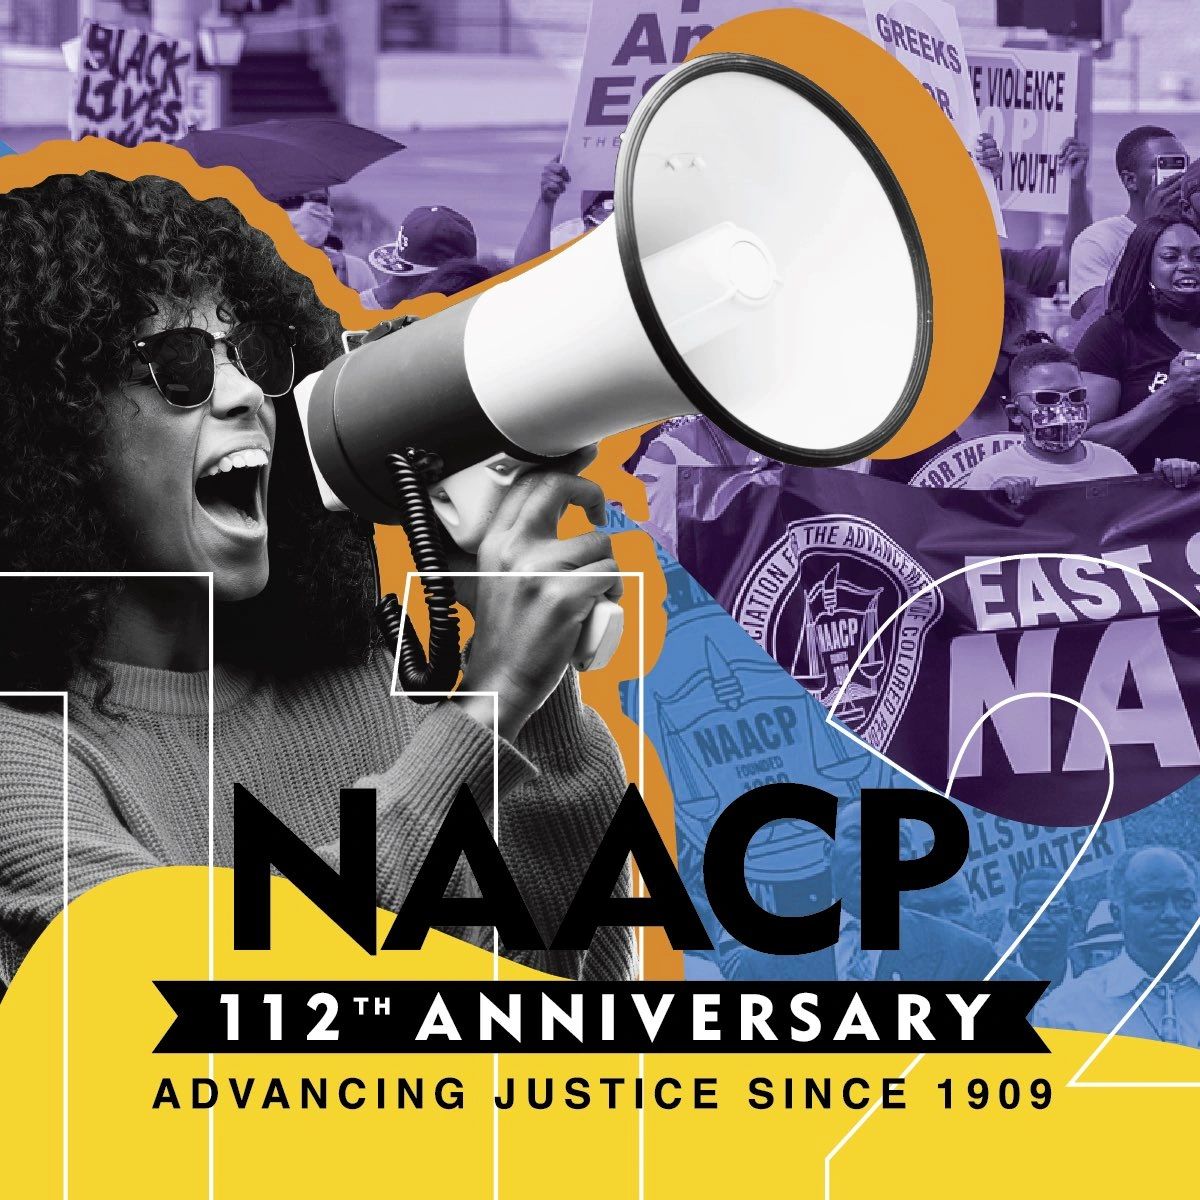 NAACPLA SAVE THE DATE The 112th NAACP National Convention